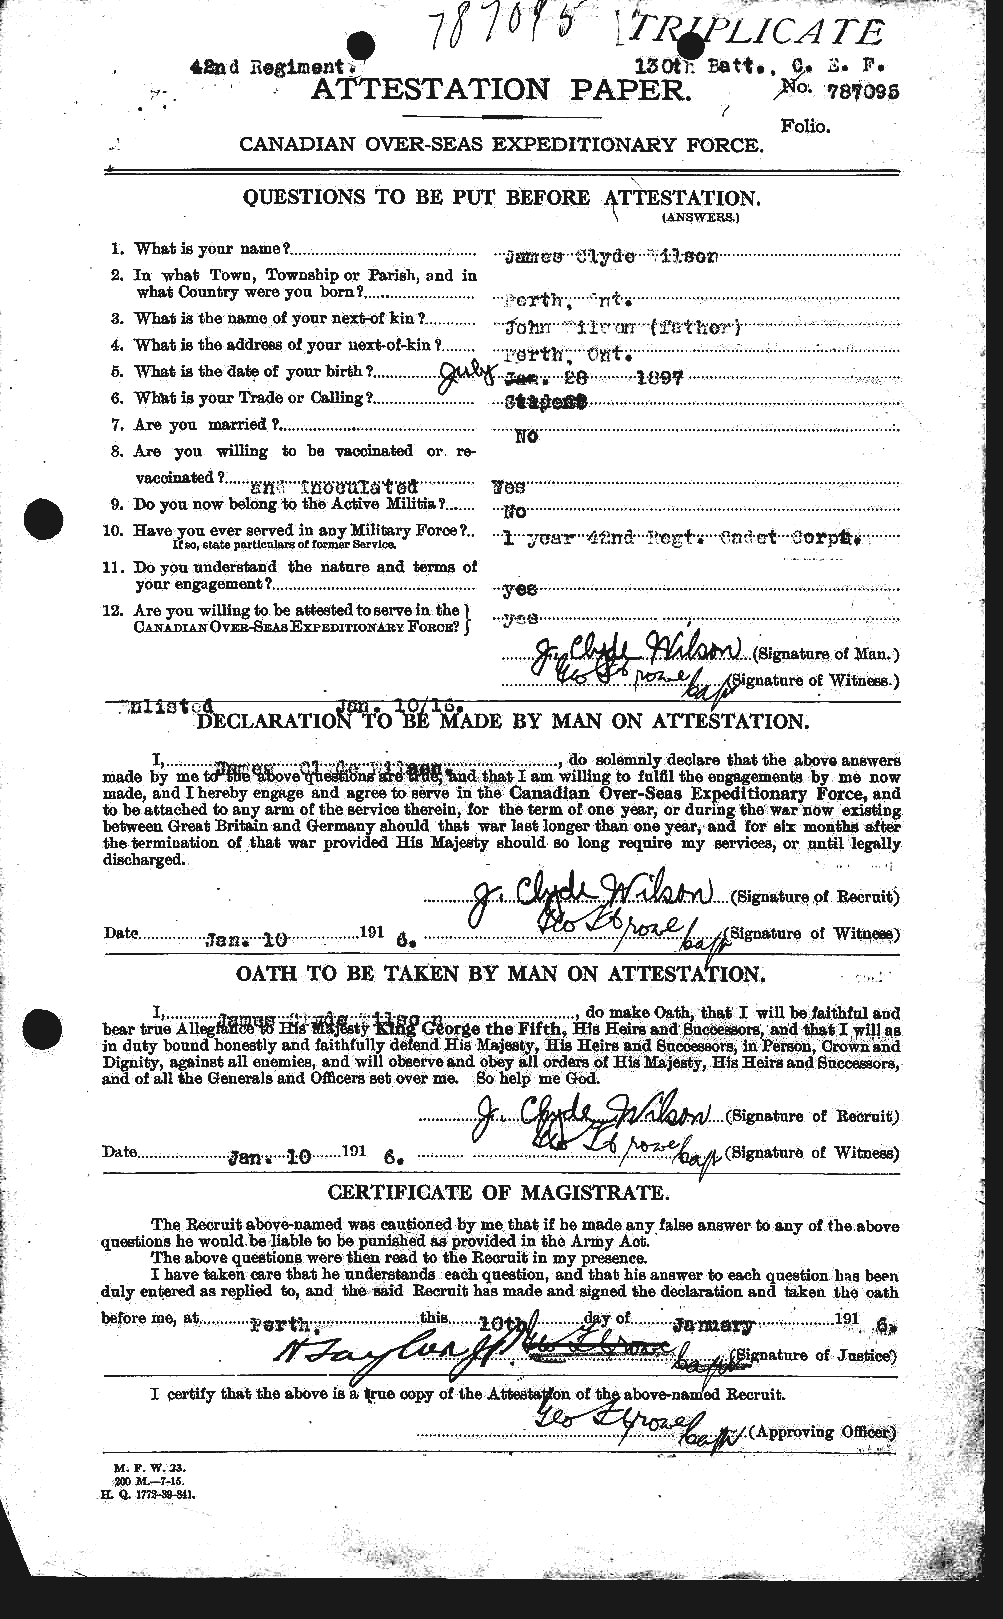 Personnel Records of the First World War - CEF 681434a